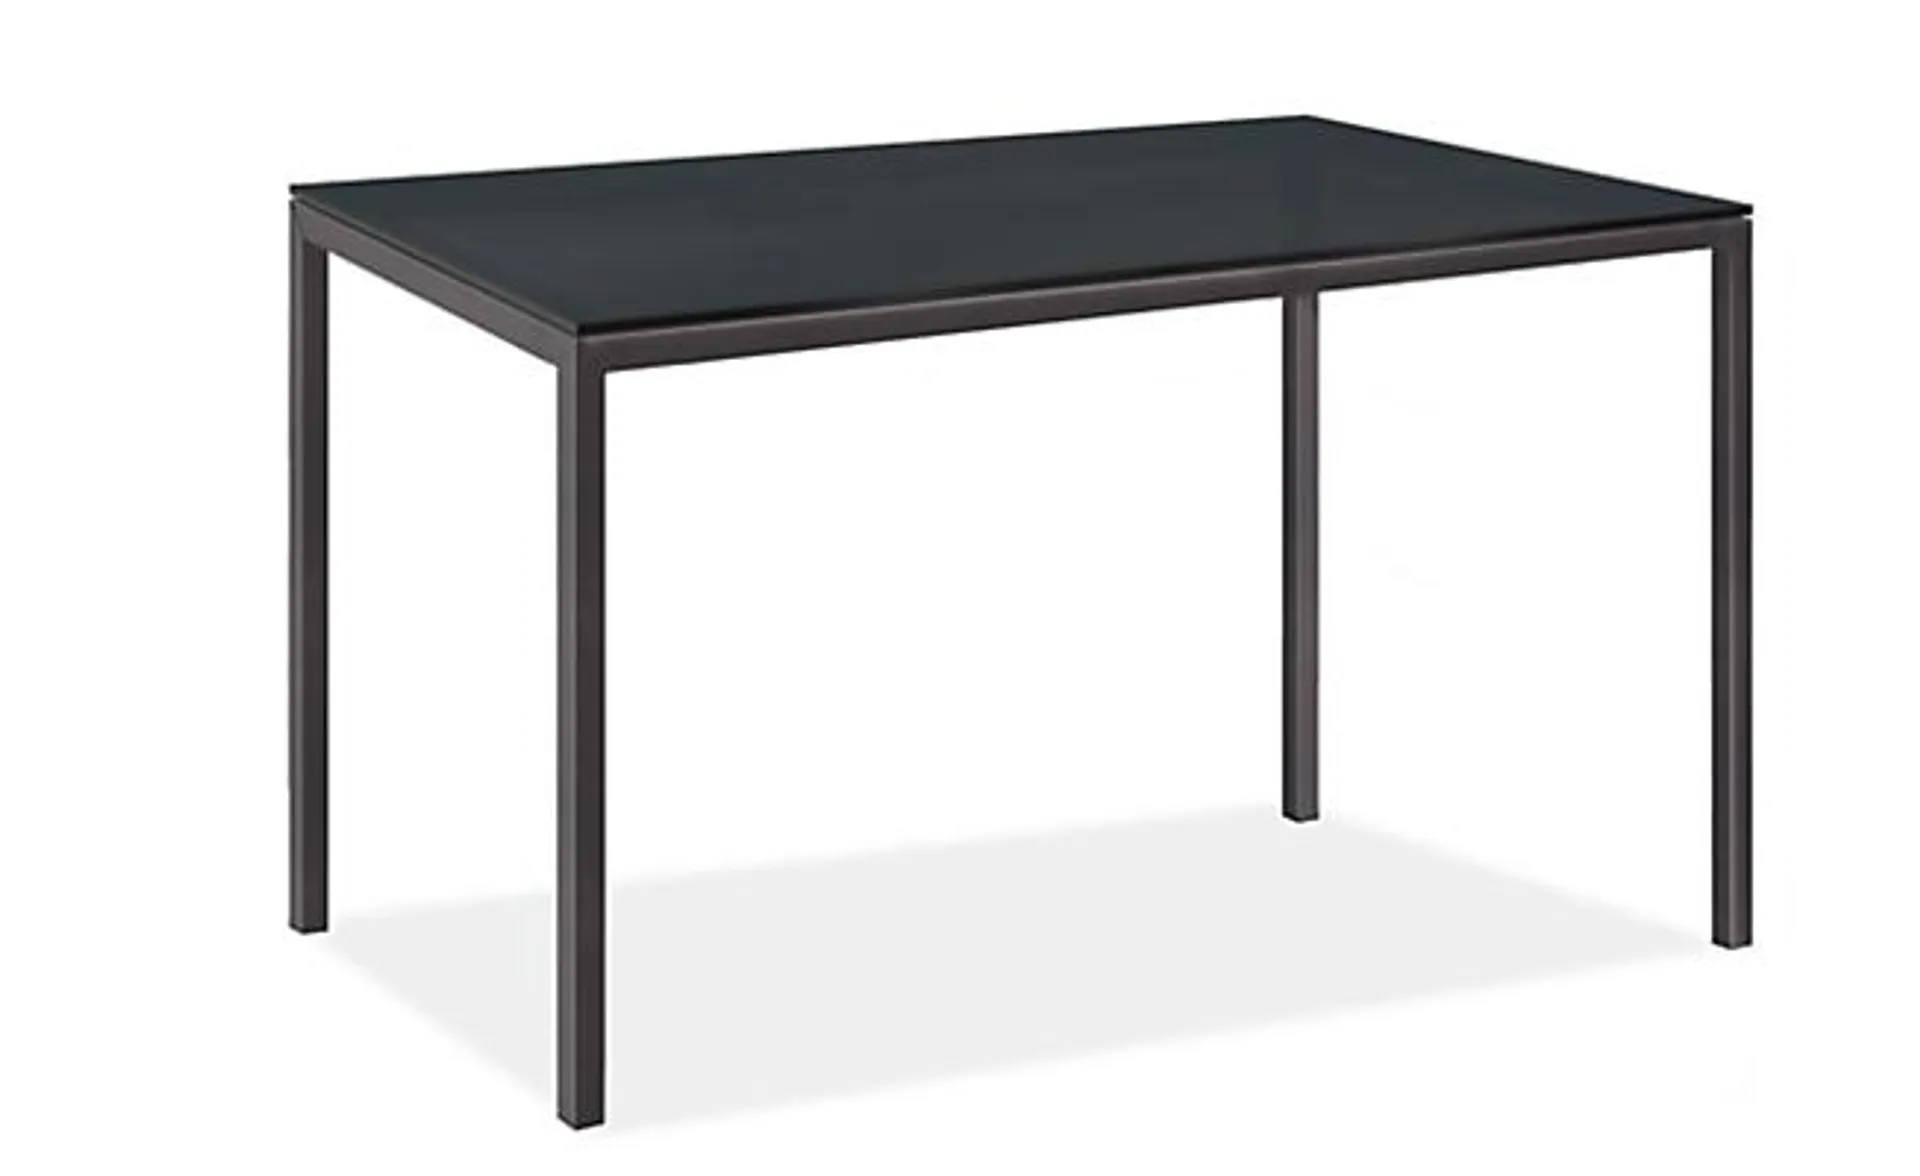 Parsons 60w 36d 36h Counter Table w/1.5" Natural Steel & Tempered Smoke Glass